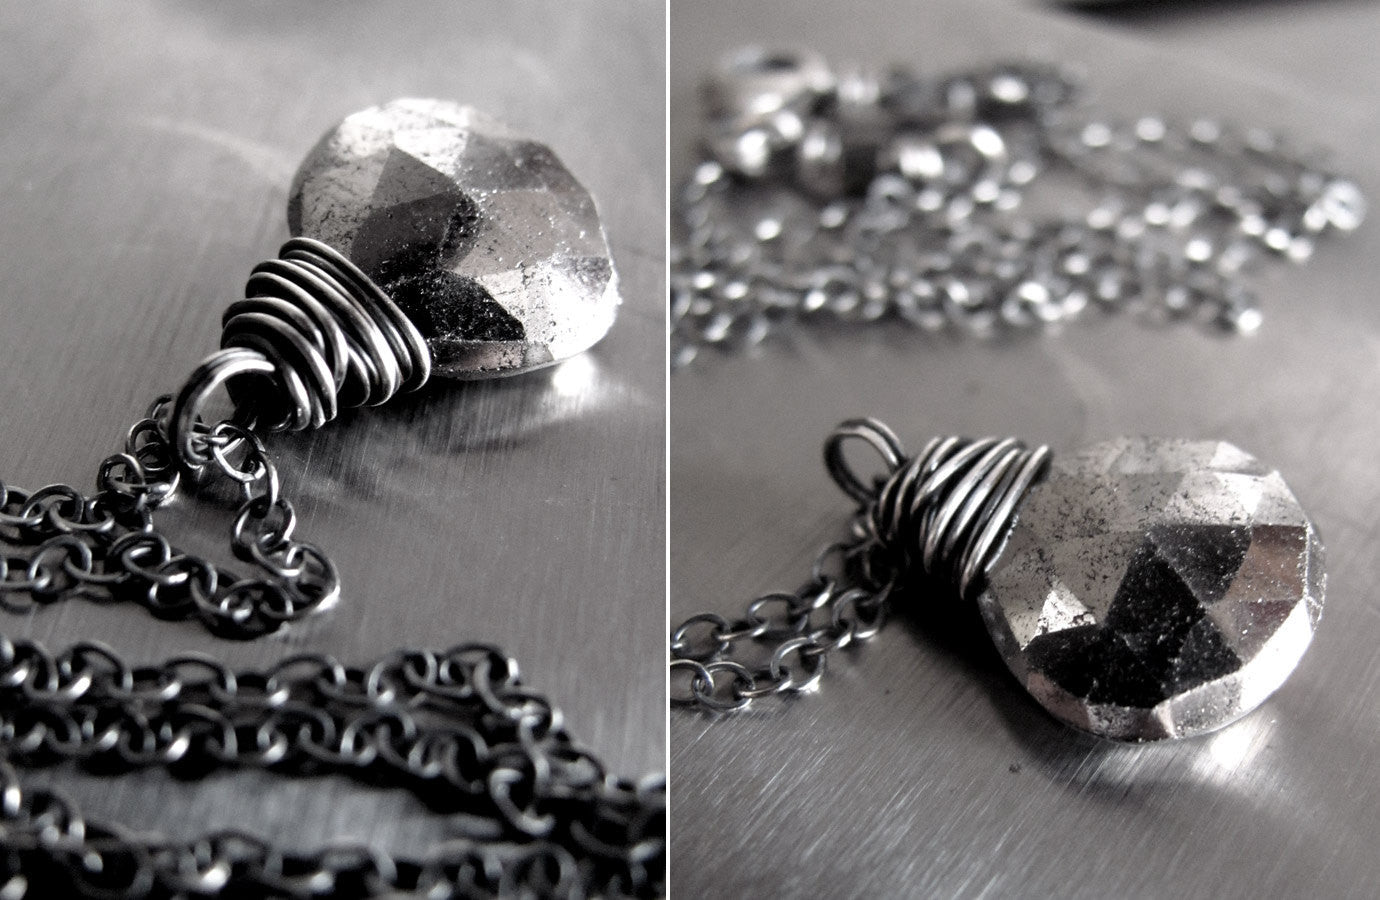 Silver Pyrite Necklace - Wire Wrapped Gemstone Necklace